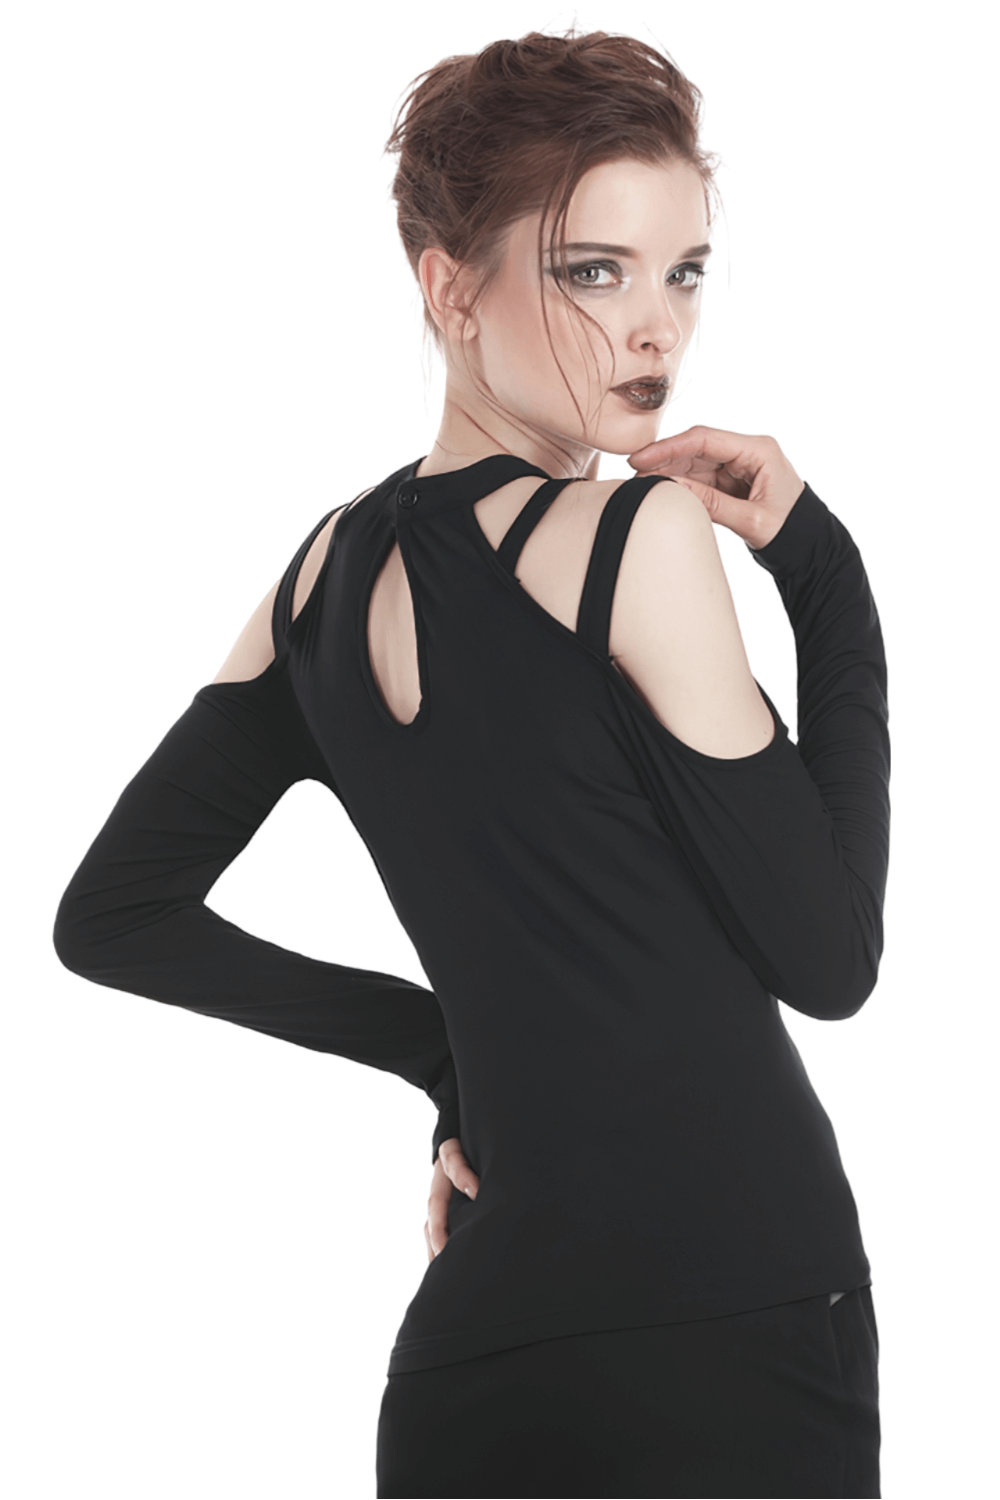 Punk Women's Long Sleeves Top with Cut Out Shoulder Straps